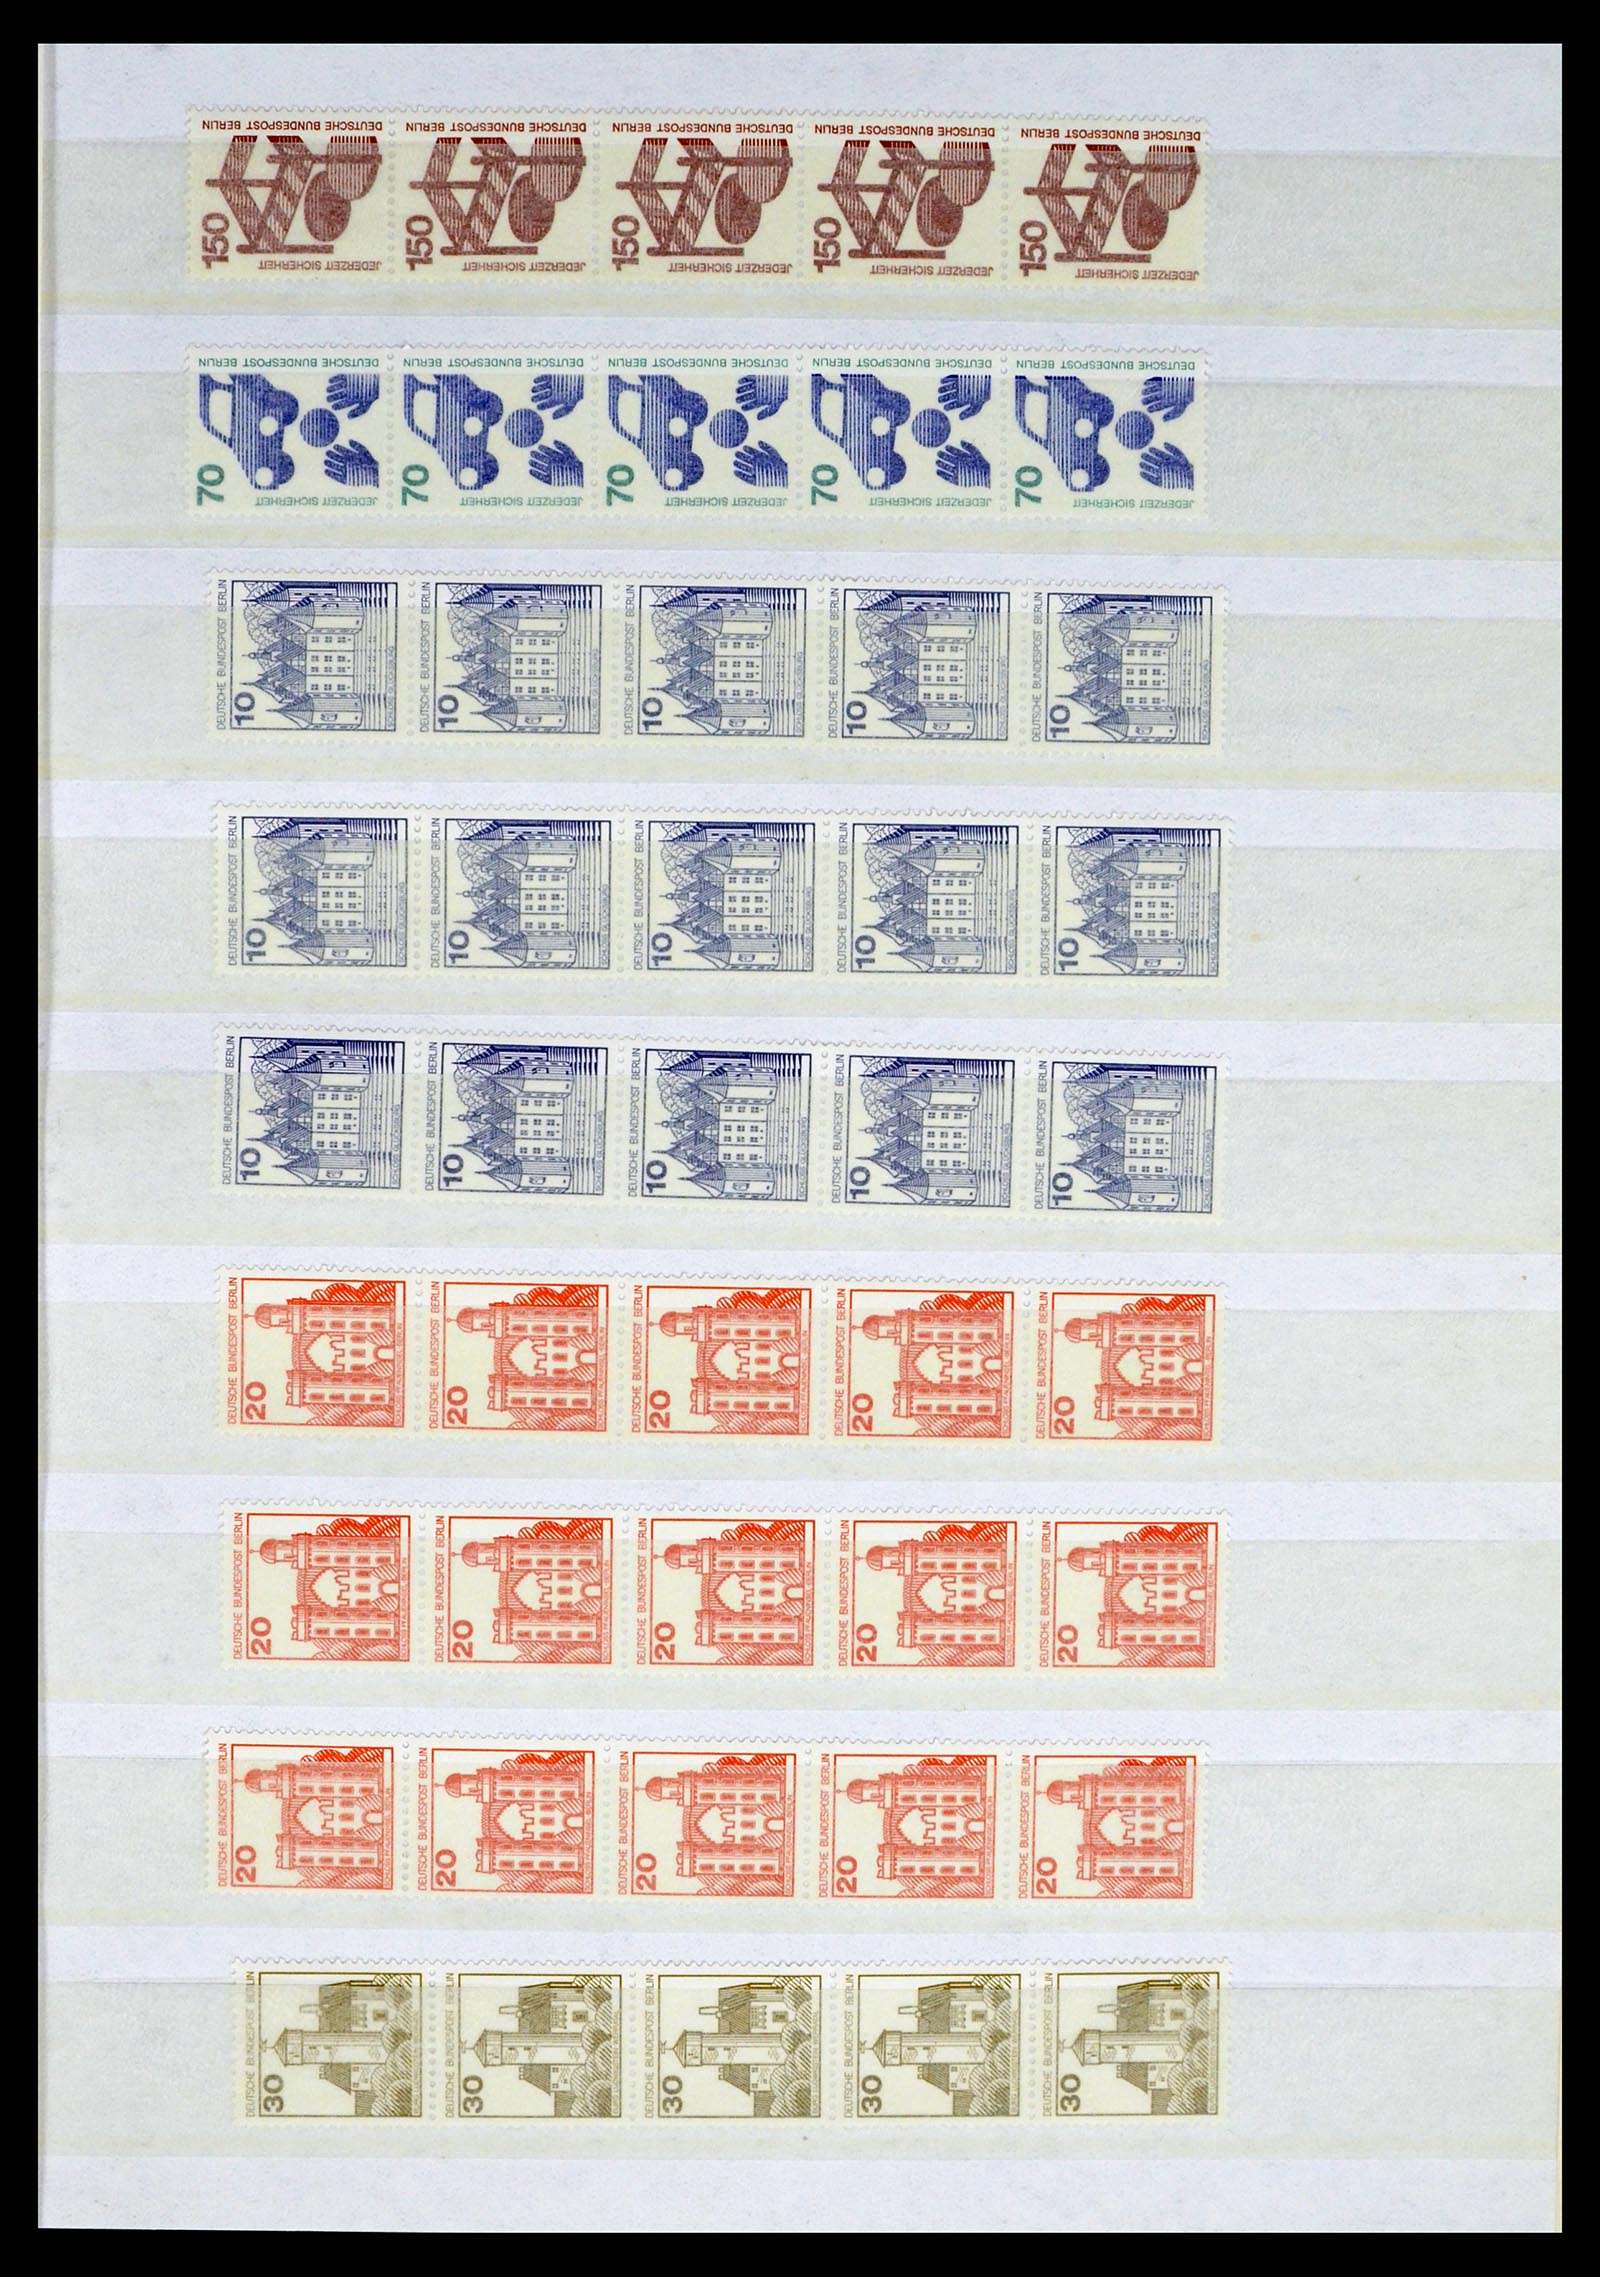 37354 094 - Stamp collection 37354 Bundespost and Berlin 1955-2000.